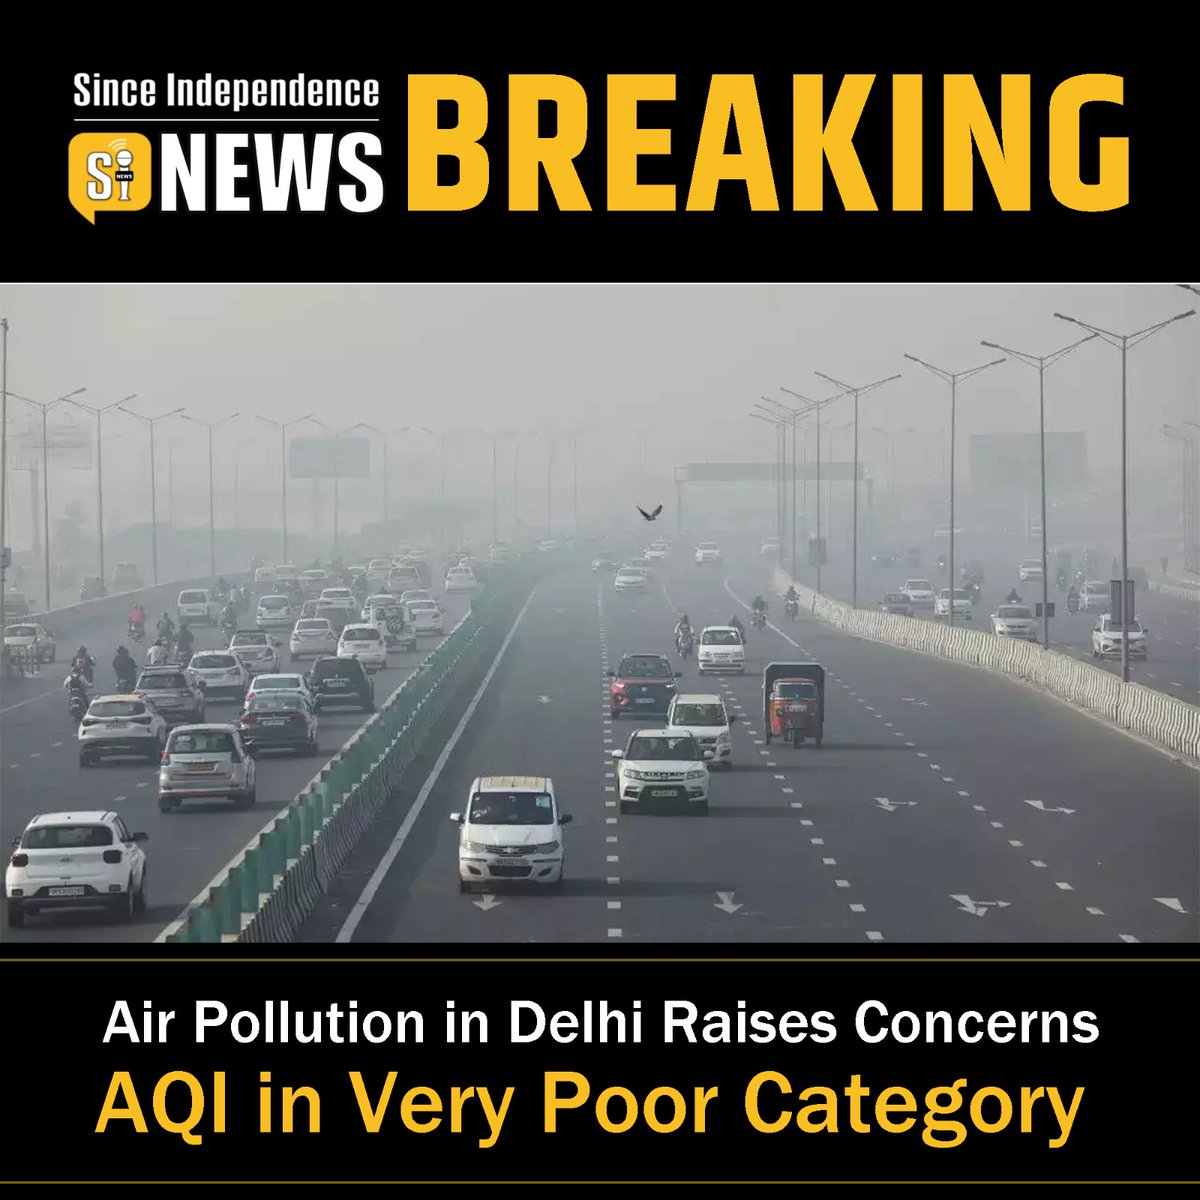 Air Pollution in Delhi Raises Concerns, AQI in Very Poor Category I Since Independence News
.
.
#Airpollutiondelhi #AapParty #AQI #delhi #winter #ArvindKejriwal #concerns #evenodd